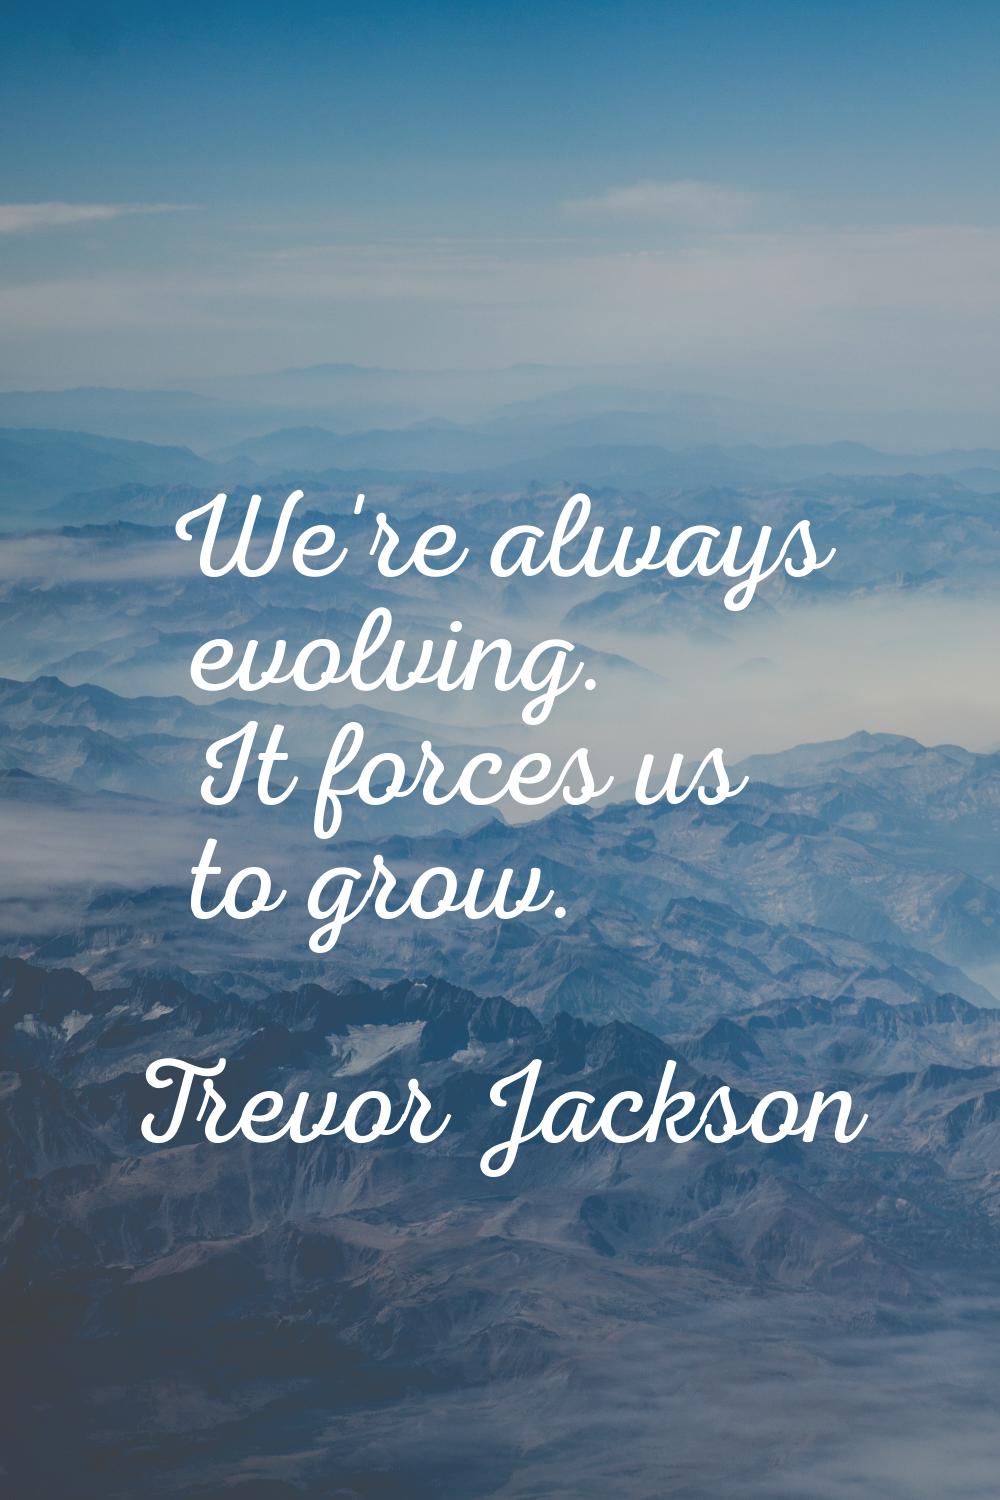 We're always evolving. It forces us to grow.